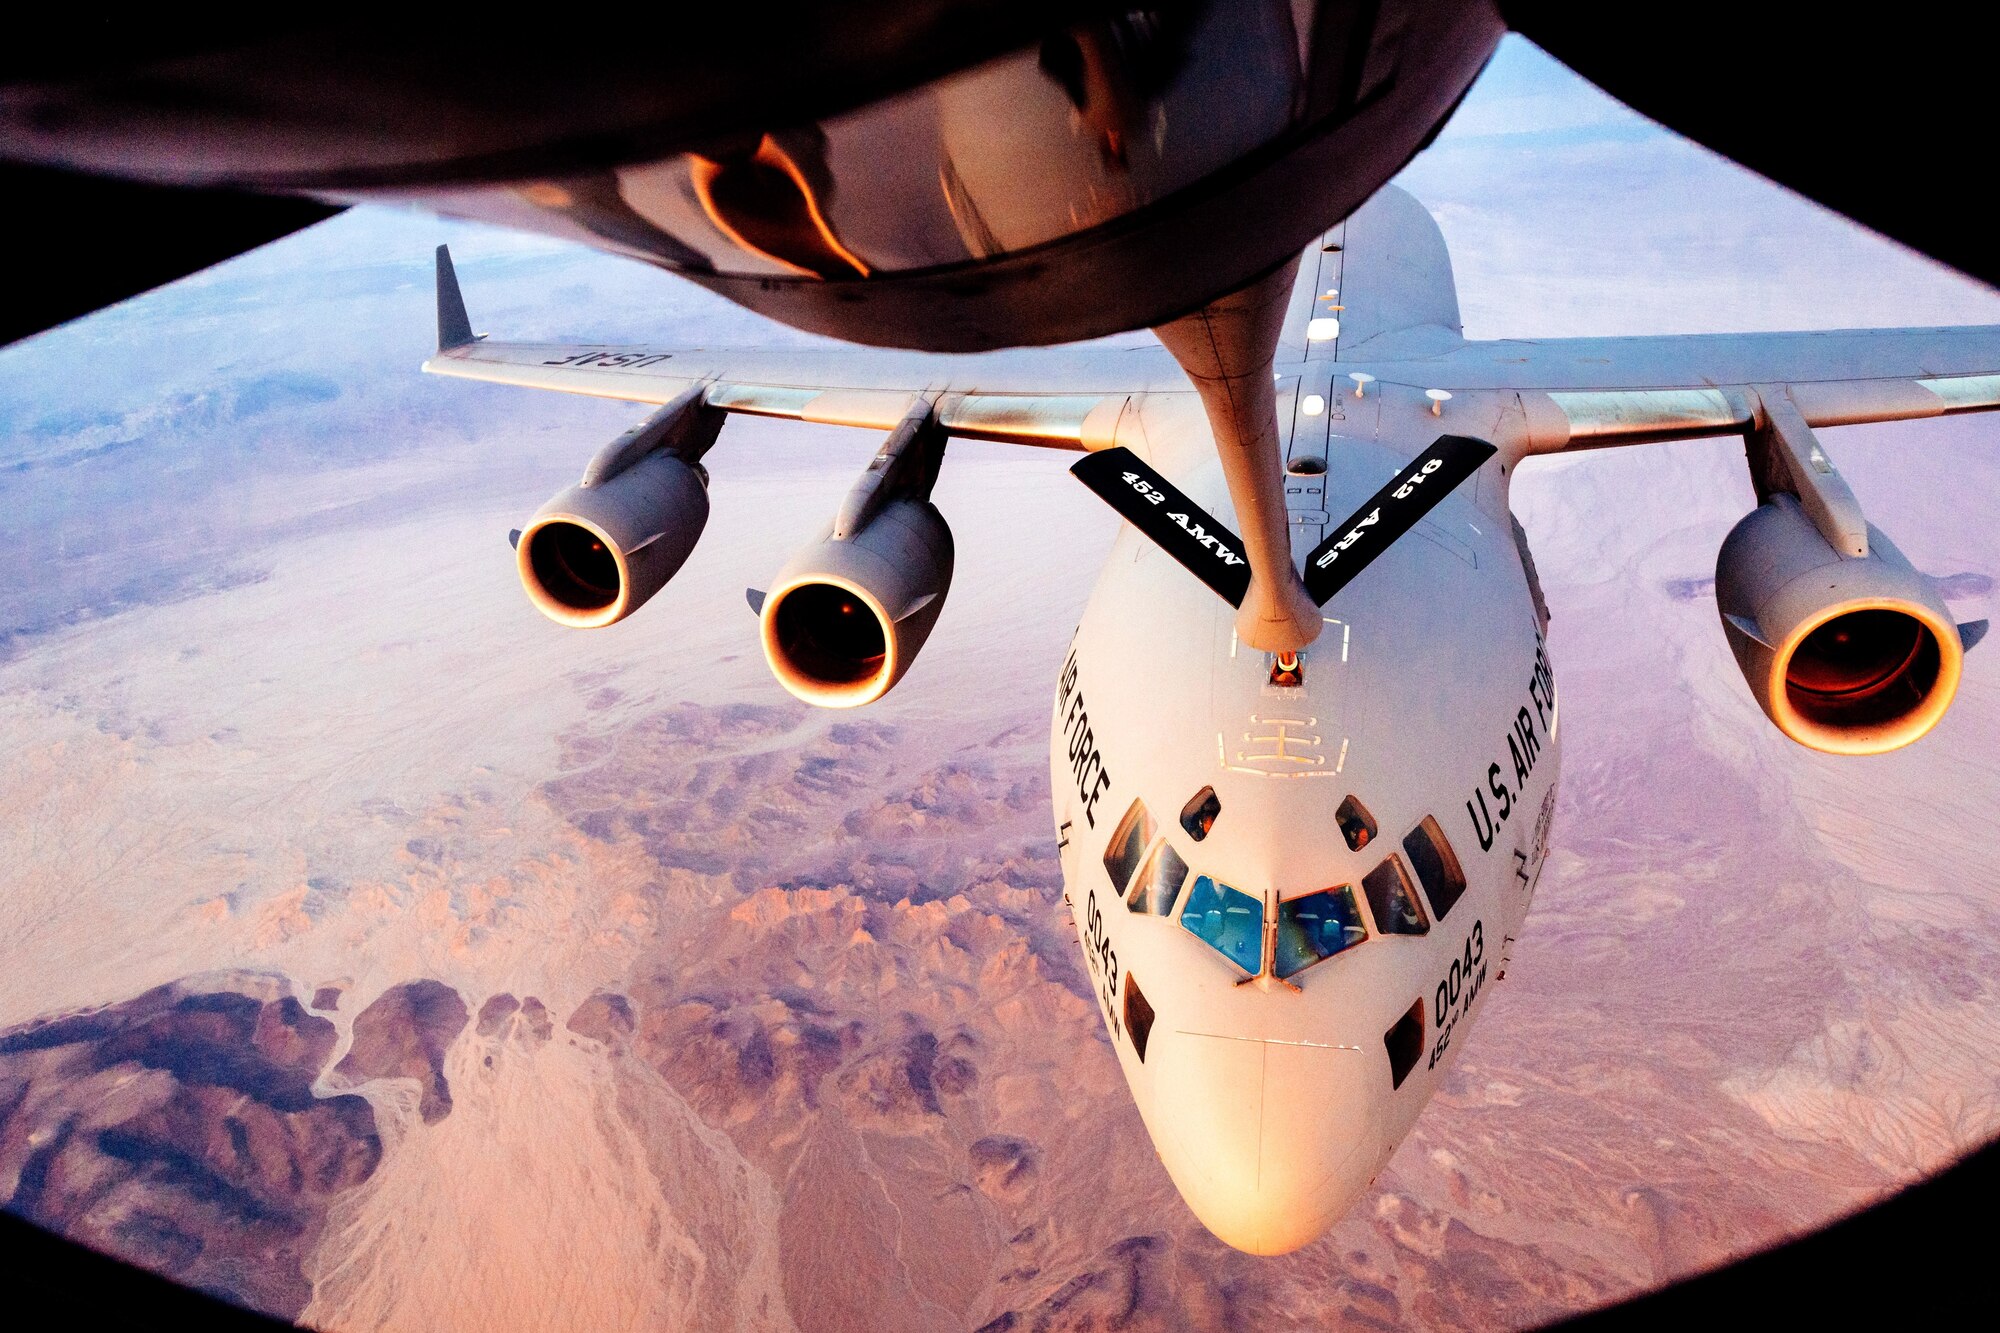 A 452nd Air Mobility Wing C-17 Globemaster III receives fuel from a 912th Aerial Refueling Squadron KC-135 Stratotanker during a refueling mission over Arizona, July 24, 2018. The 912th ARS is responsible for providing essential mission extending capabilities through refueling services. (U.S. Air Force photo by Staff Sgt. Jordan Castelan)